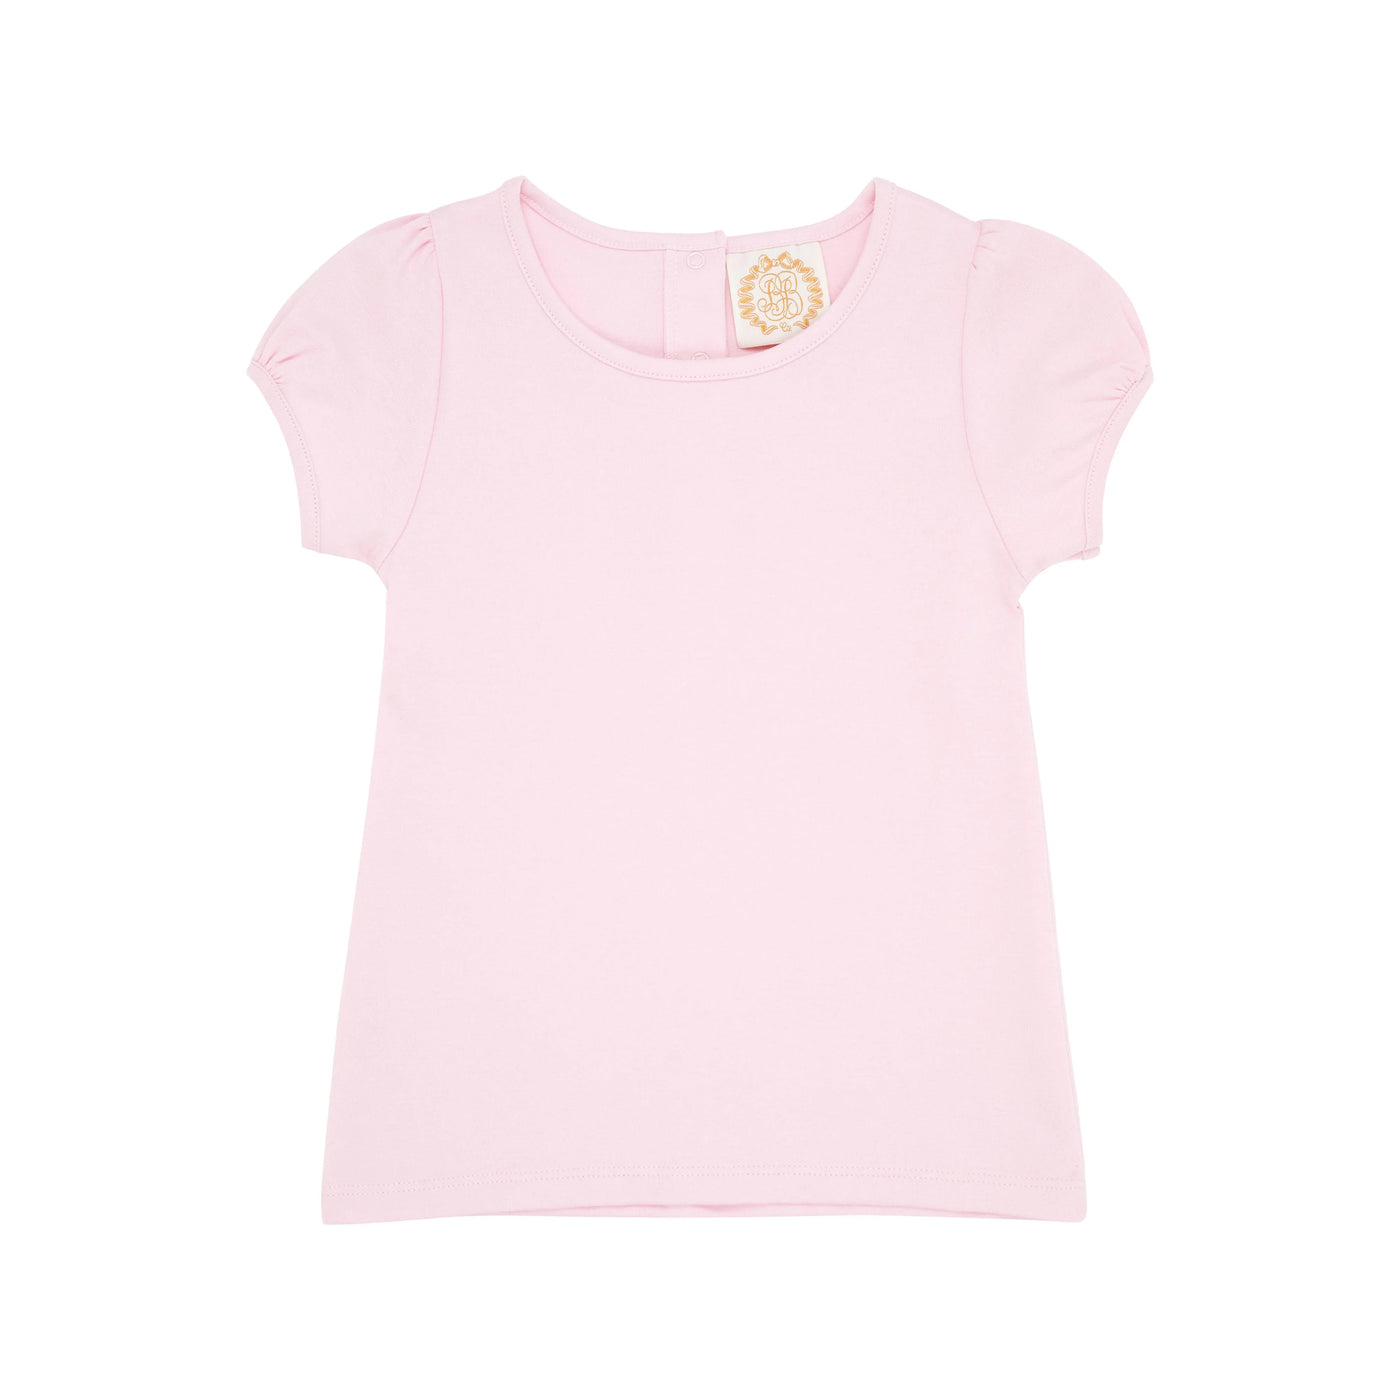 Pennys Play Shirt in Palm Beach Pink